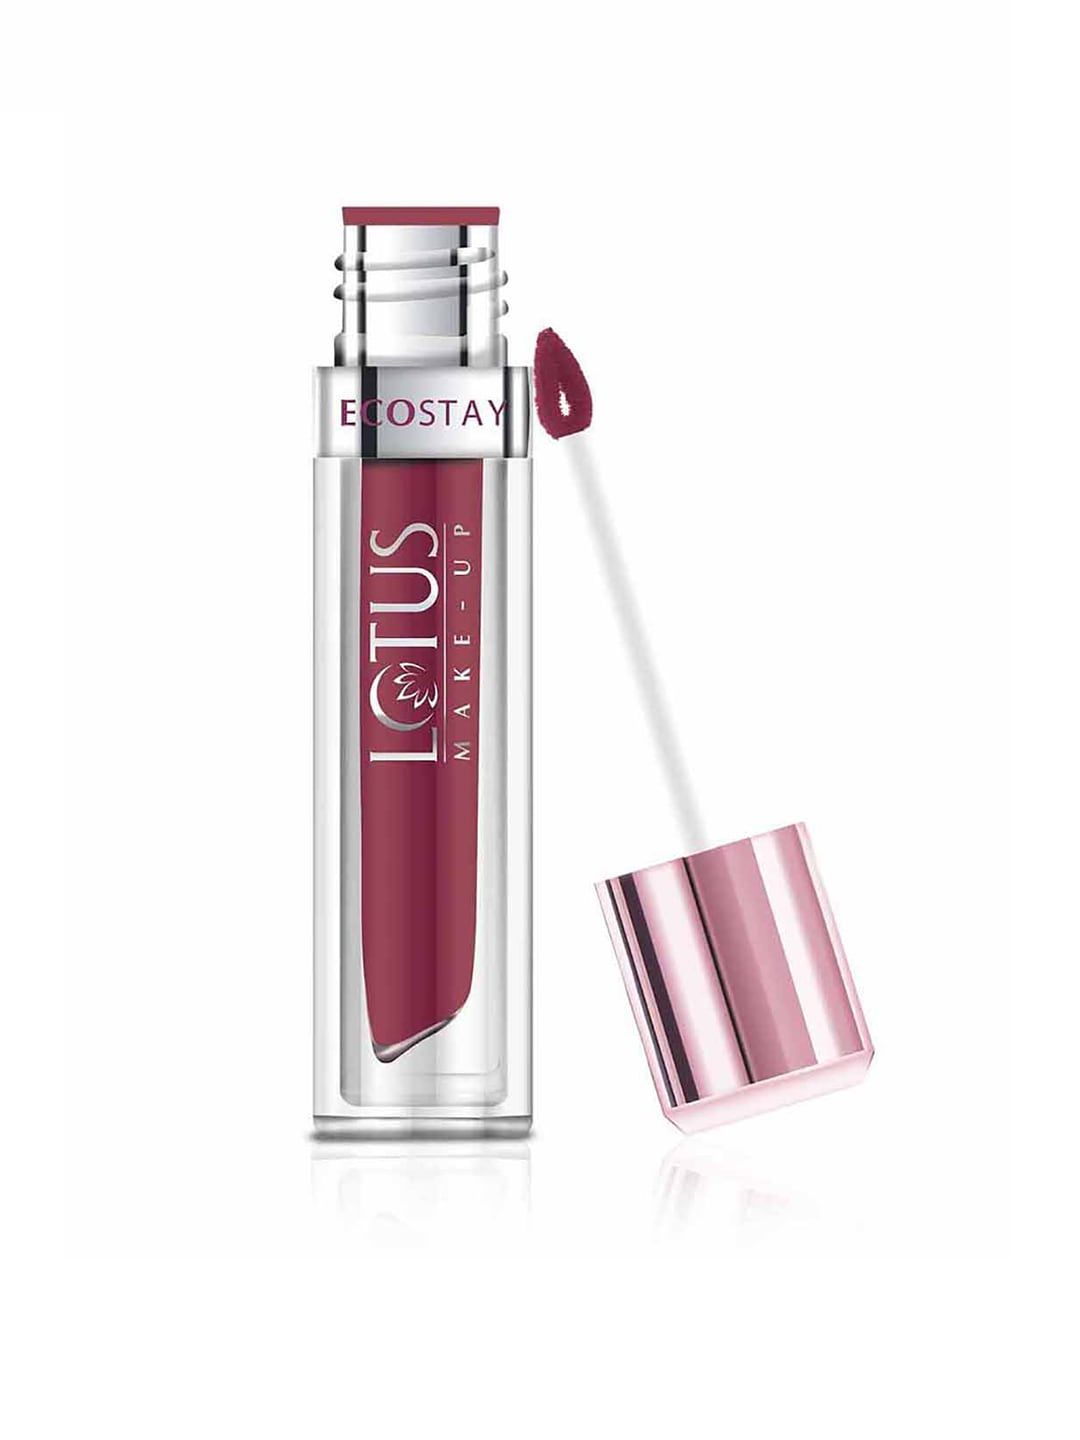 Lotus Herbals Sustainable Ecostay Rose Bouquet Matte Lip Lacquer EL17 Price in India